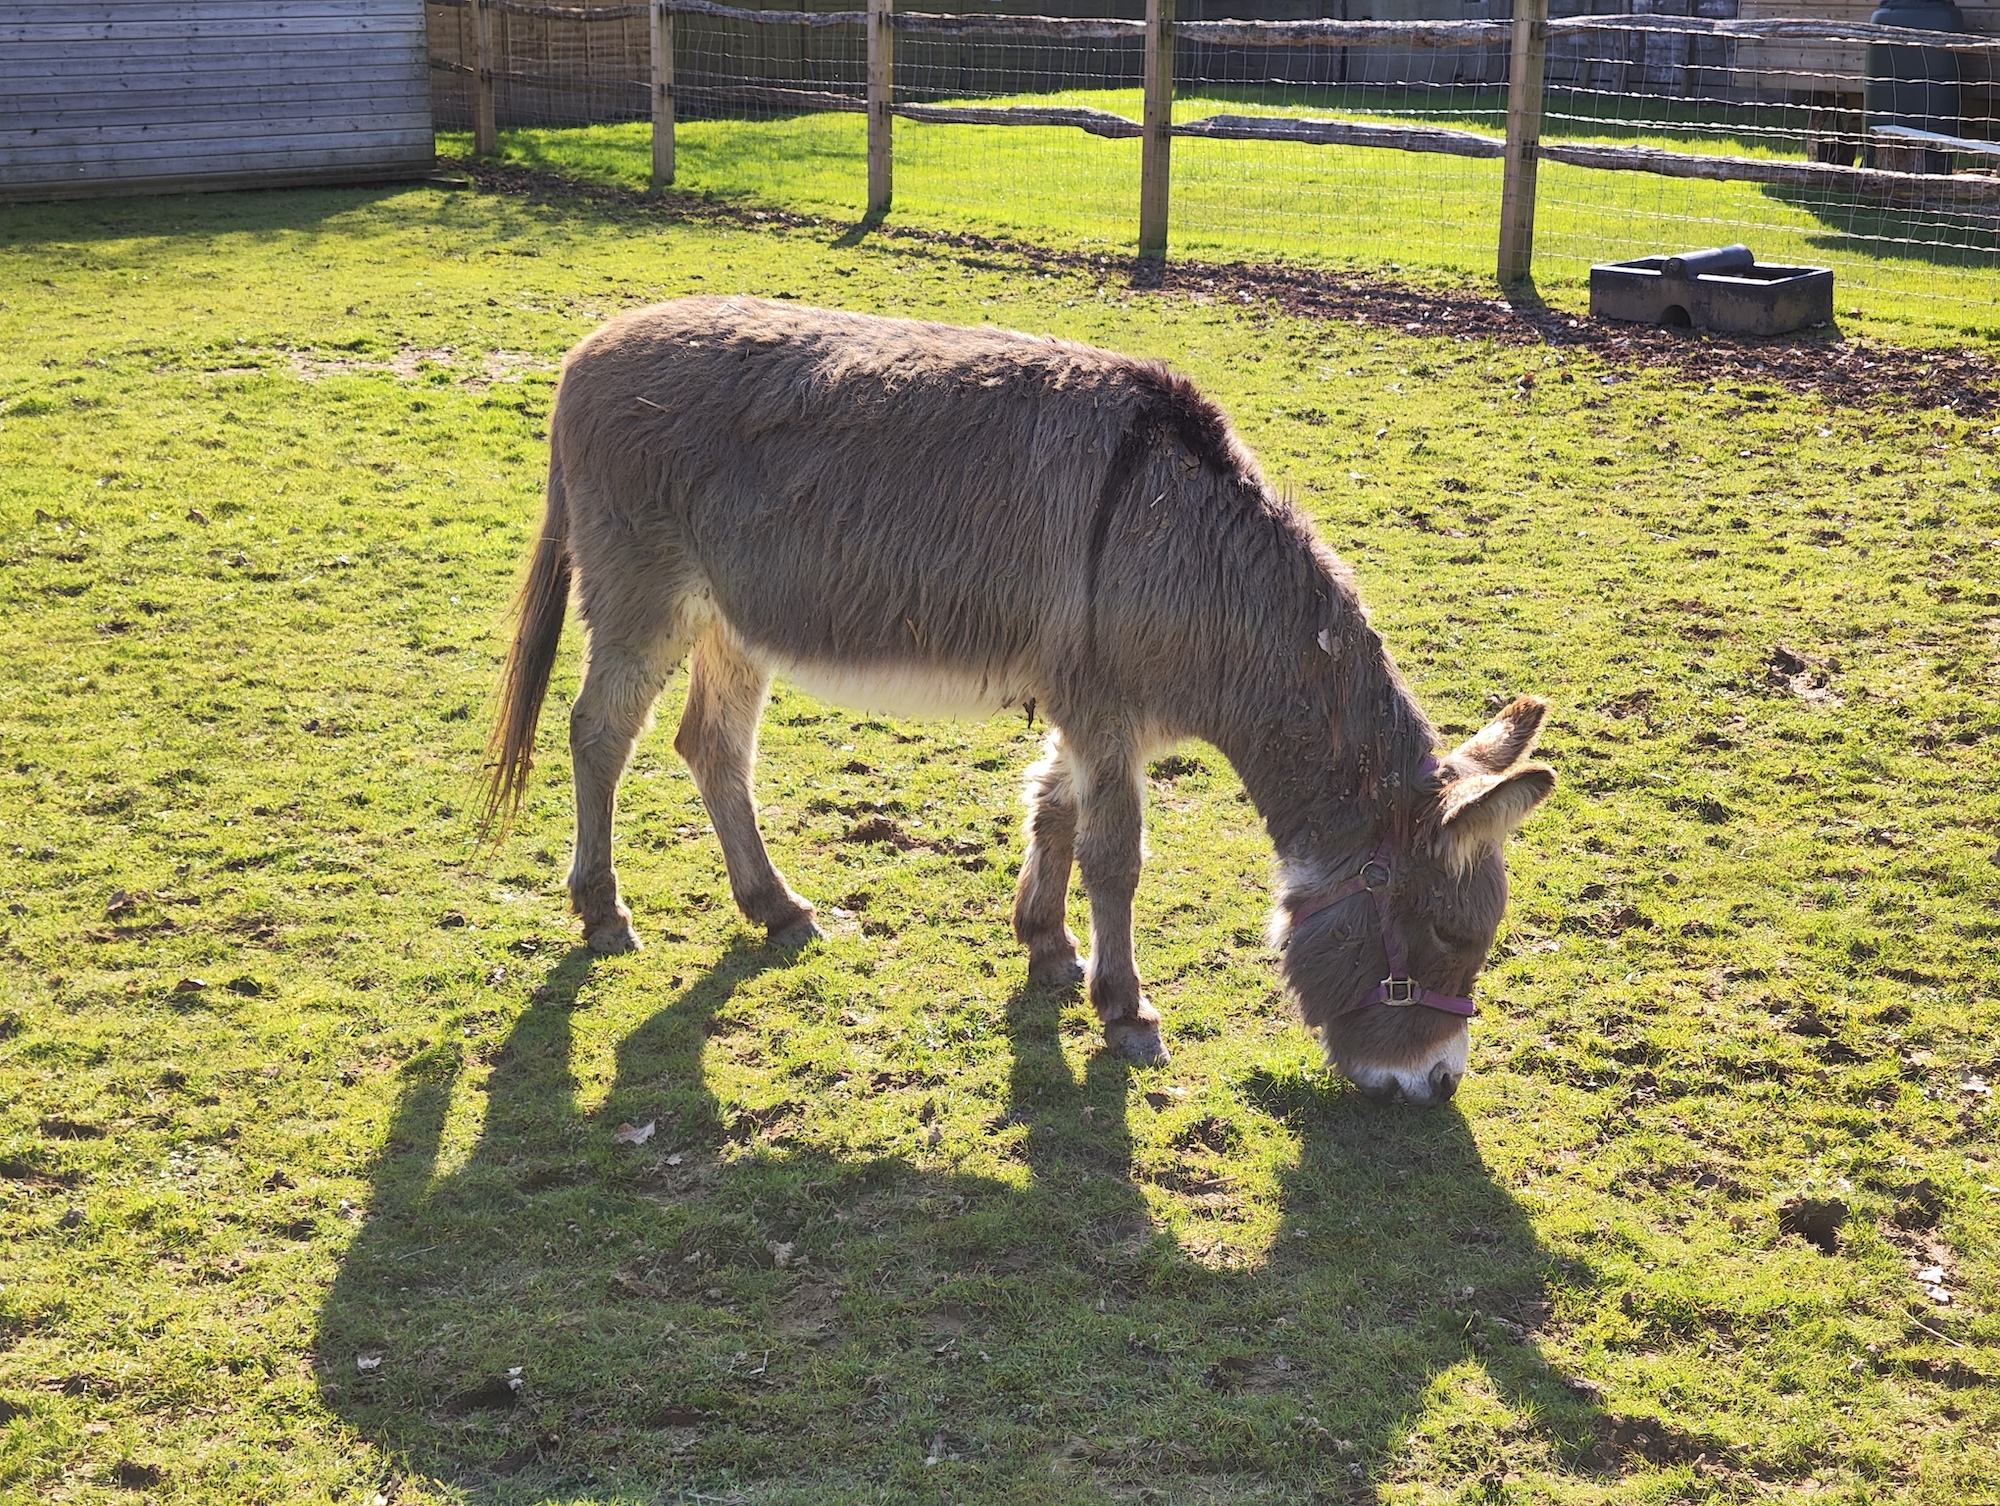 Photo of a donkey taken with the Xiaomi 12 Pro.